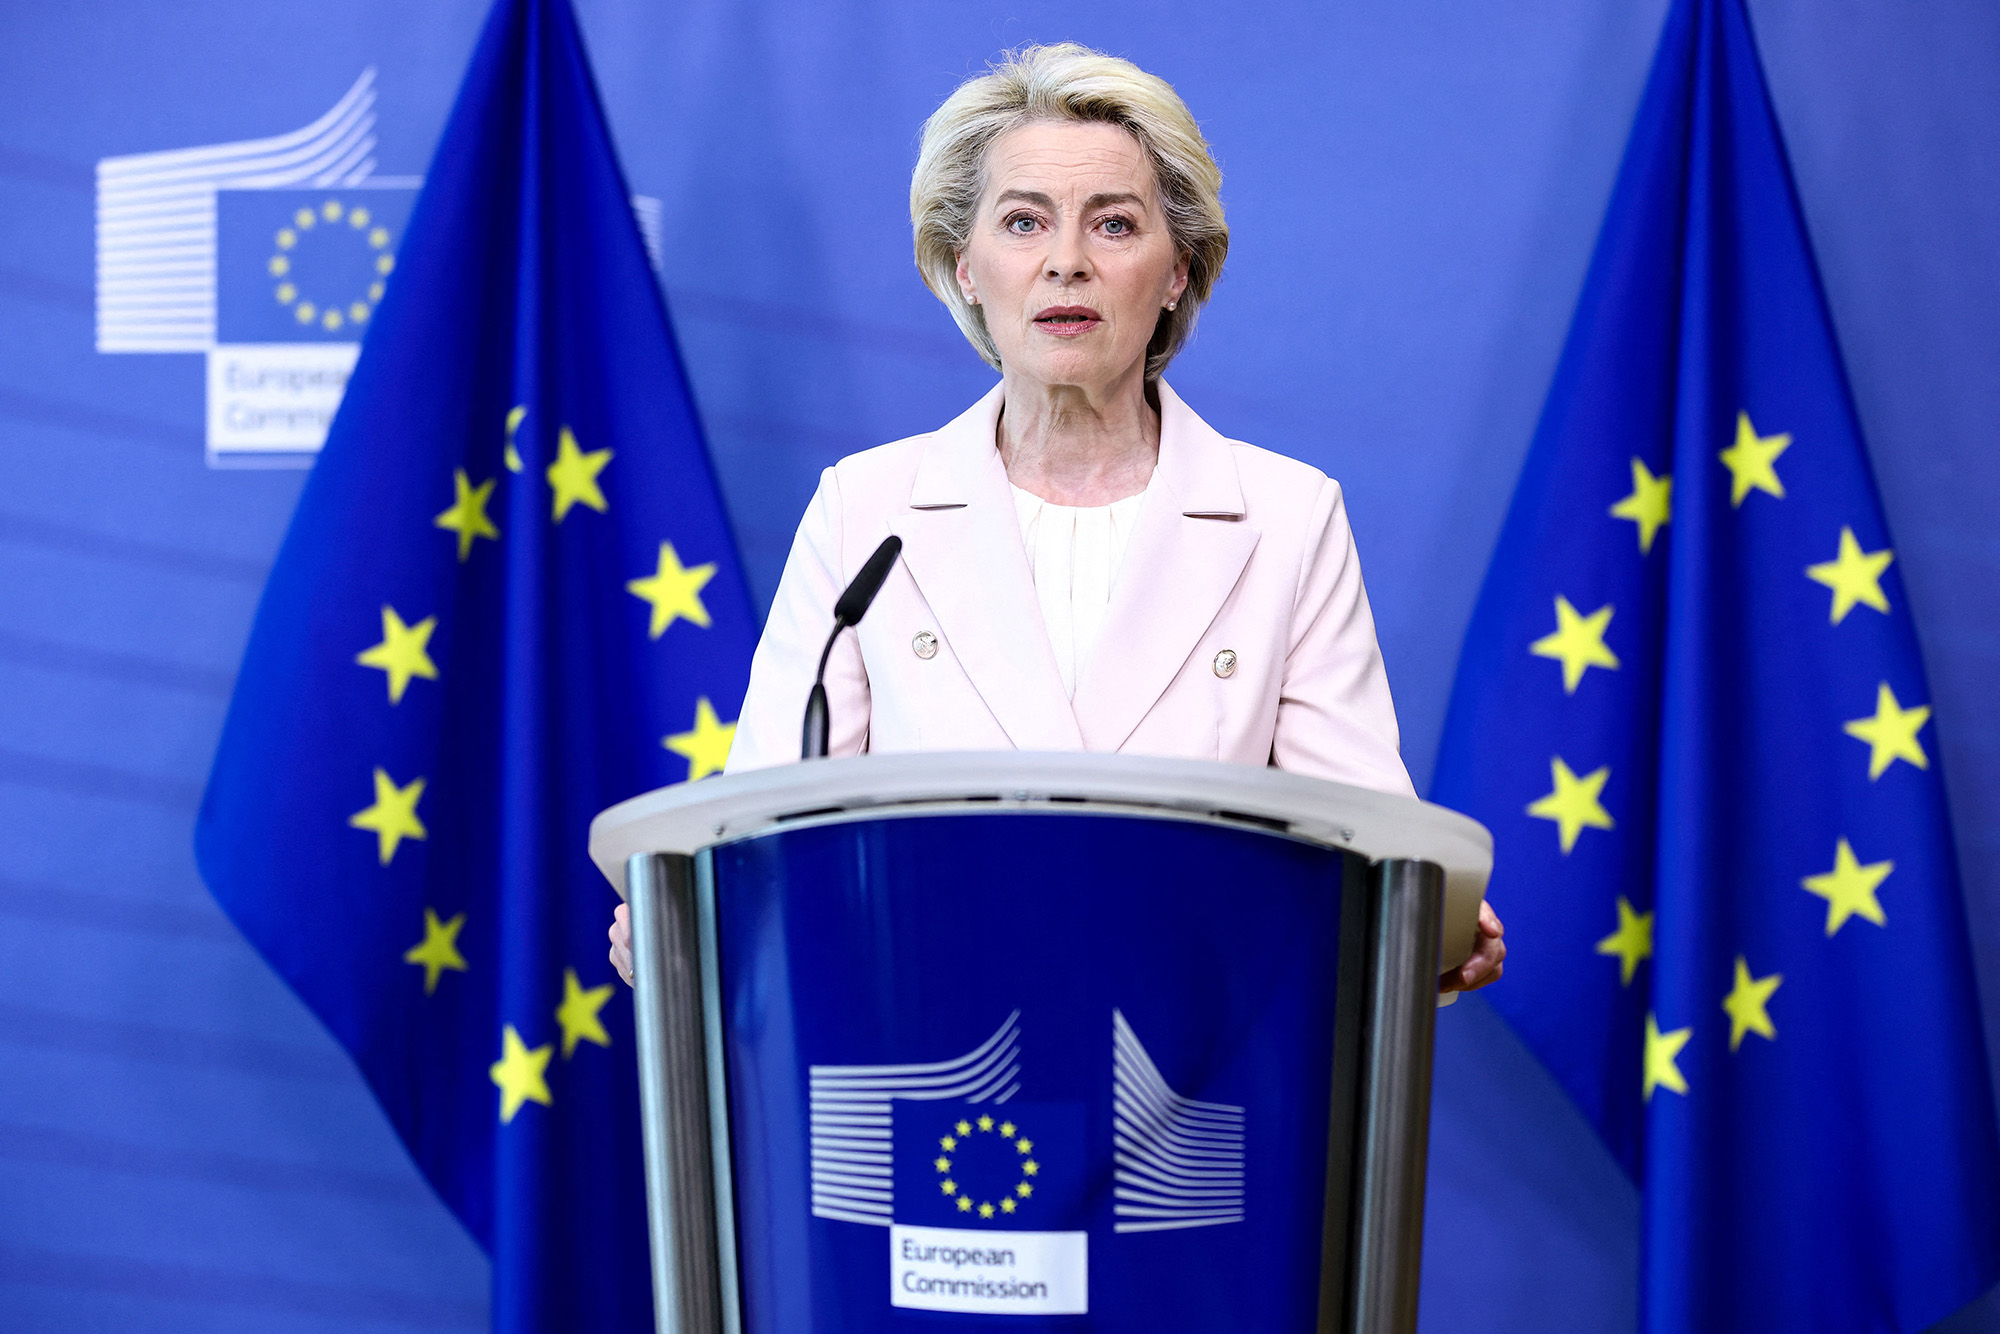 European Commission President Ursula von der Leyen makes a statement in Brussels, Belgium, on April 27 following the decision of Russian energy giant Gazprom to halt gas transport to Poland and Bulgaria.